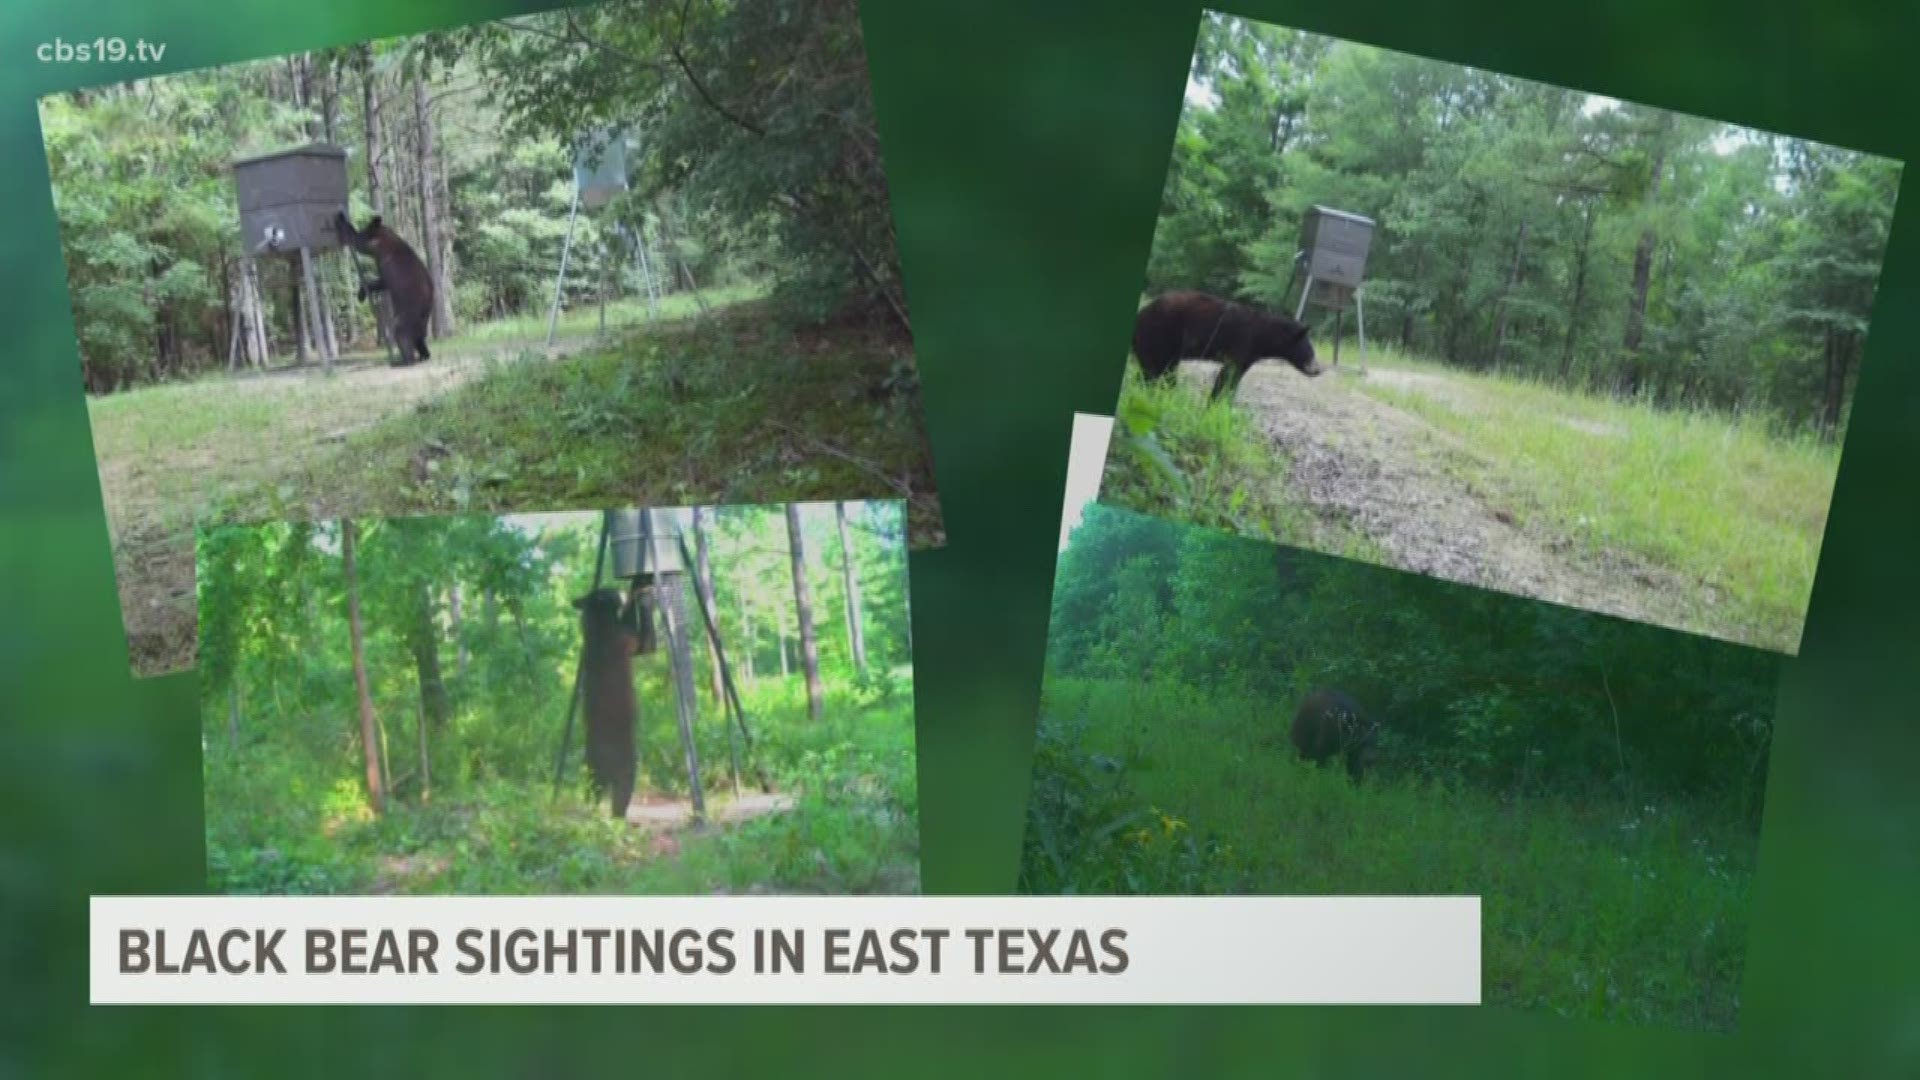 YOU SHOULD KNOW Numerous black bears sightings reported in East Texas